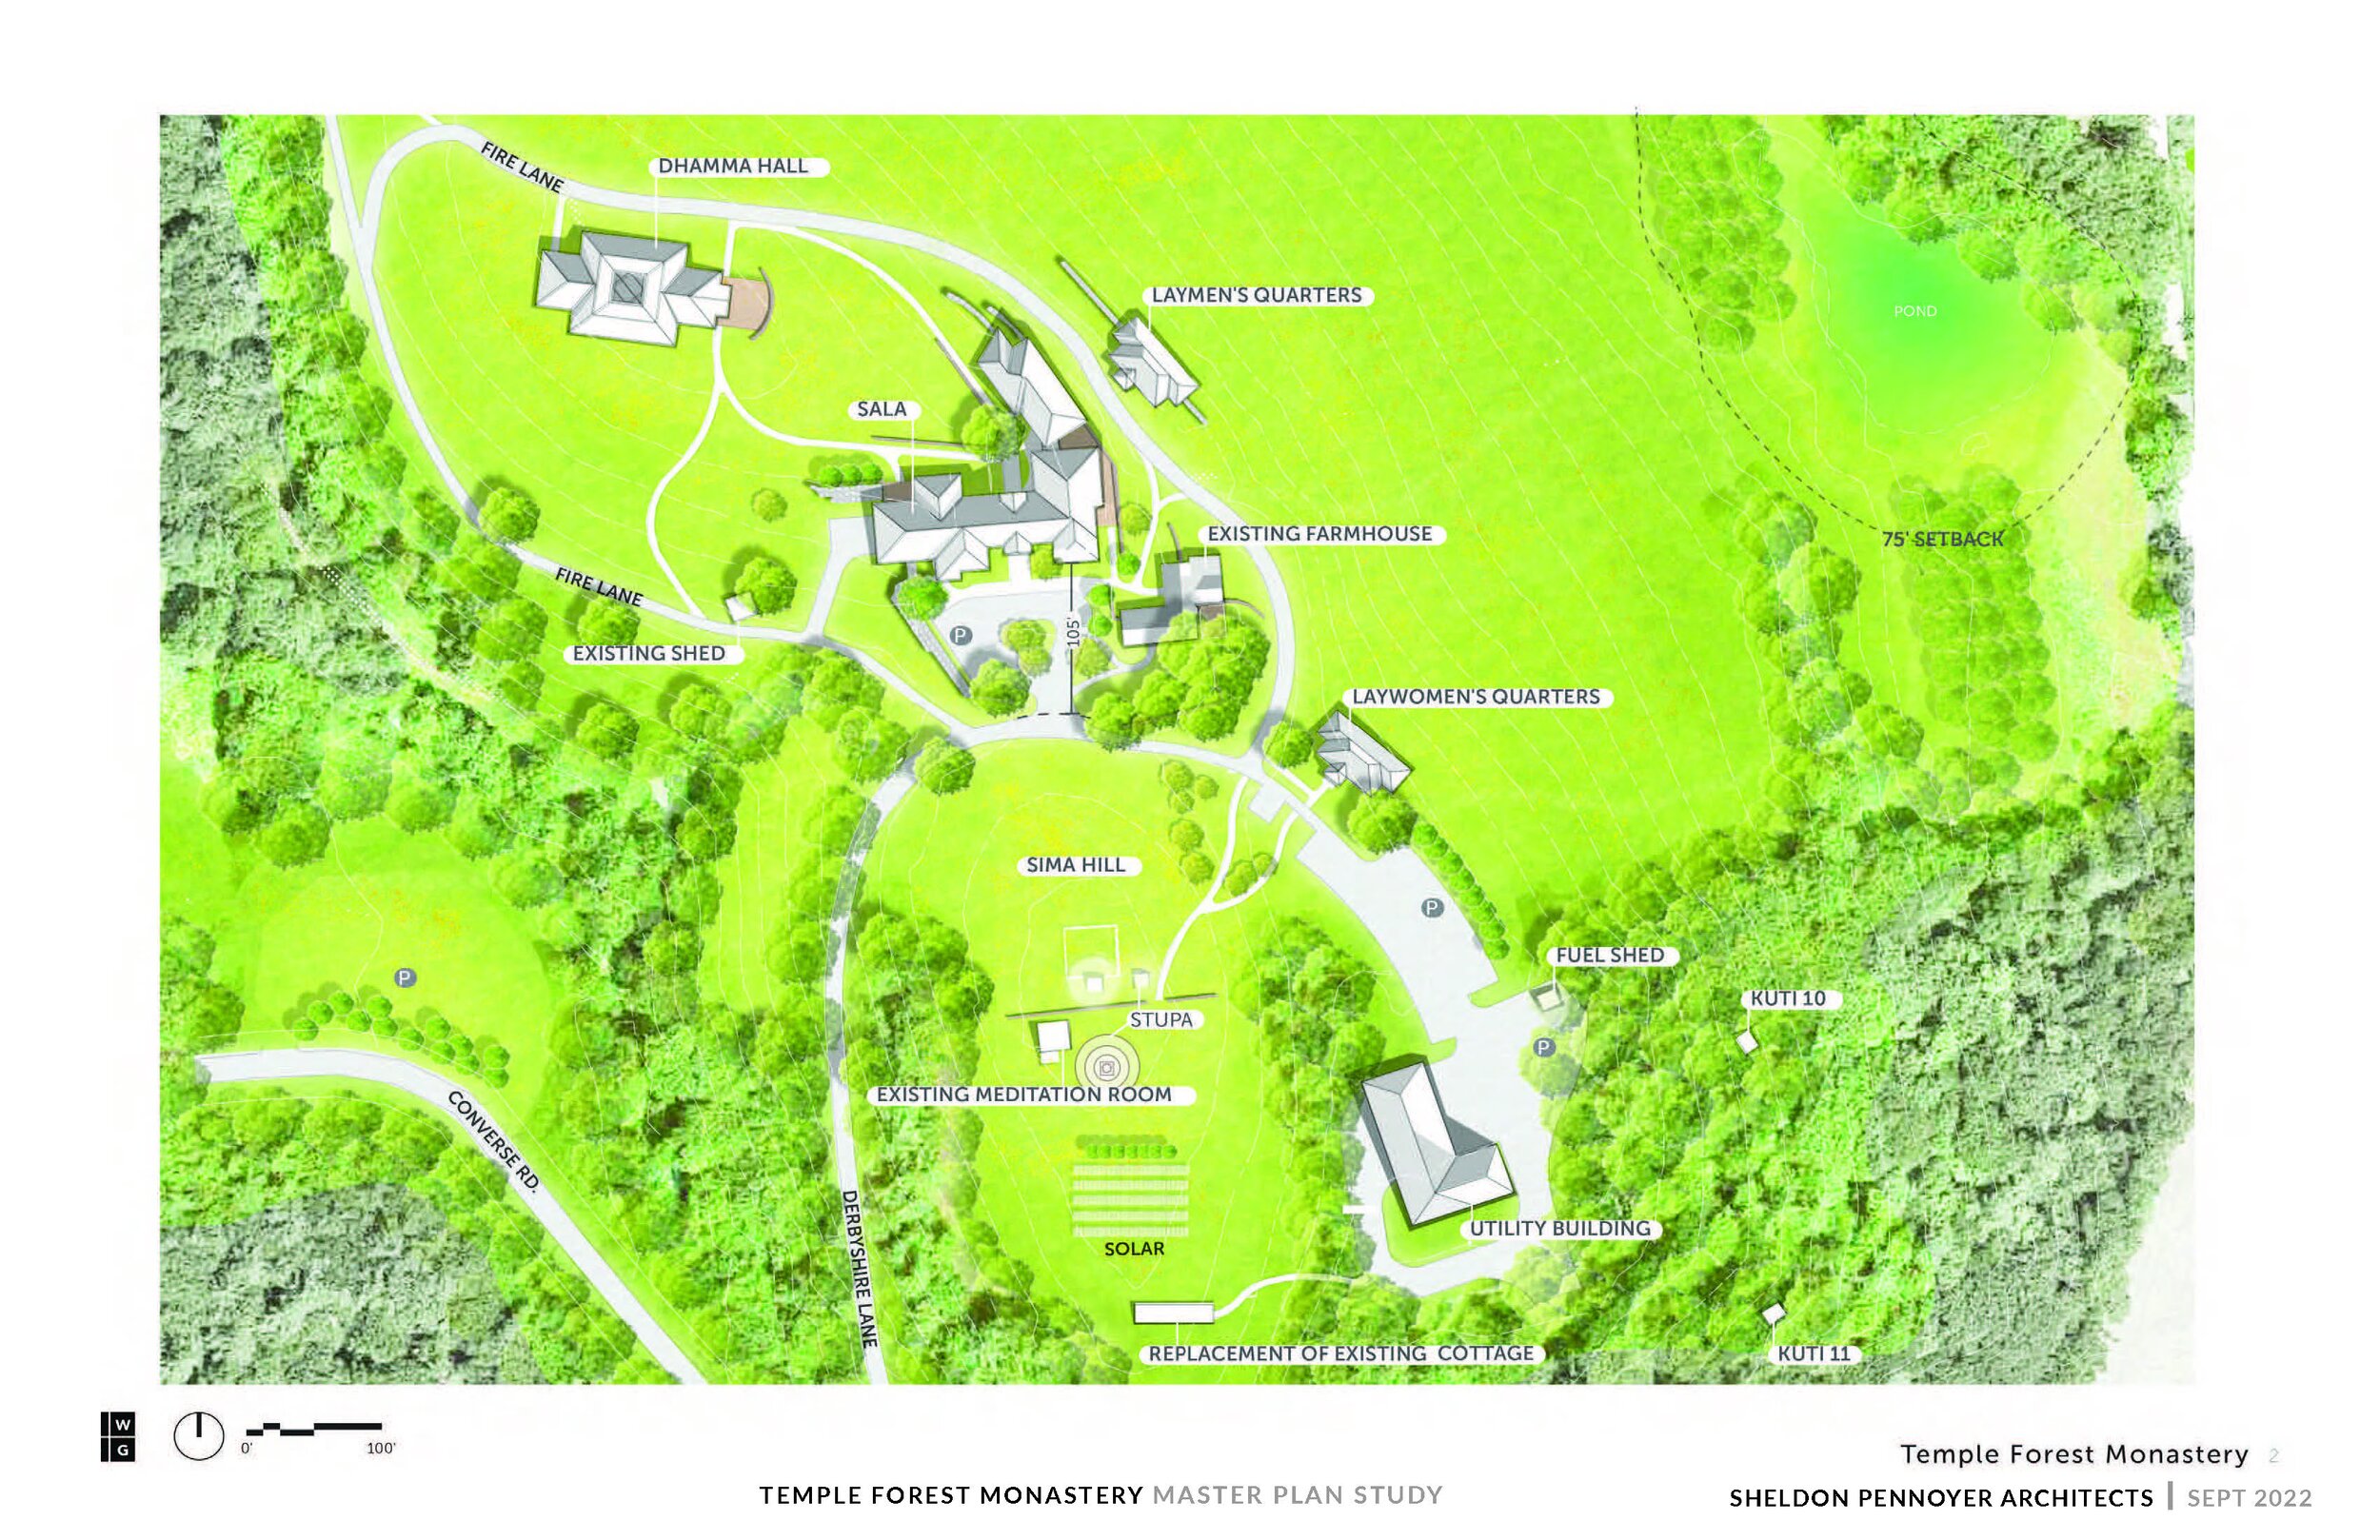 2022-09-20 Temple Forest Monastery Master Plan Study – Edited-Optimized copy for images_Page_04.jpg